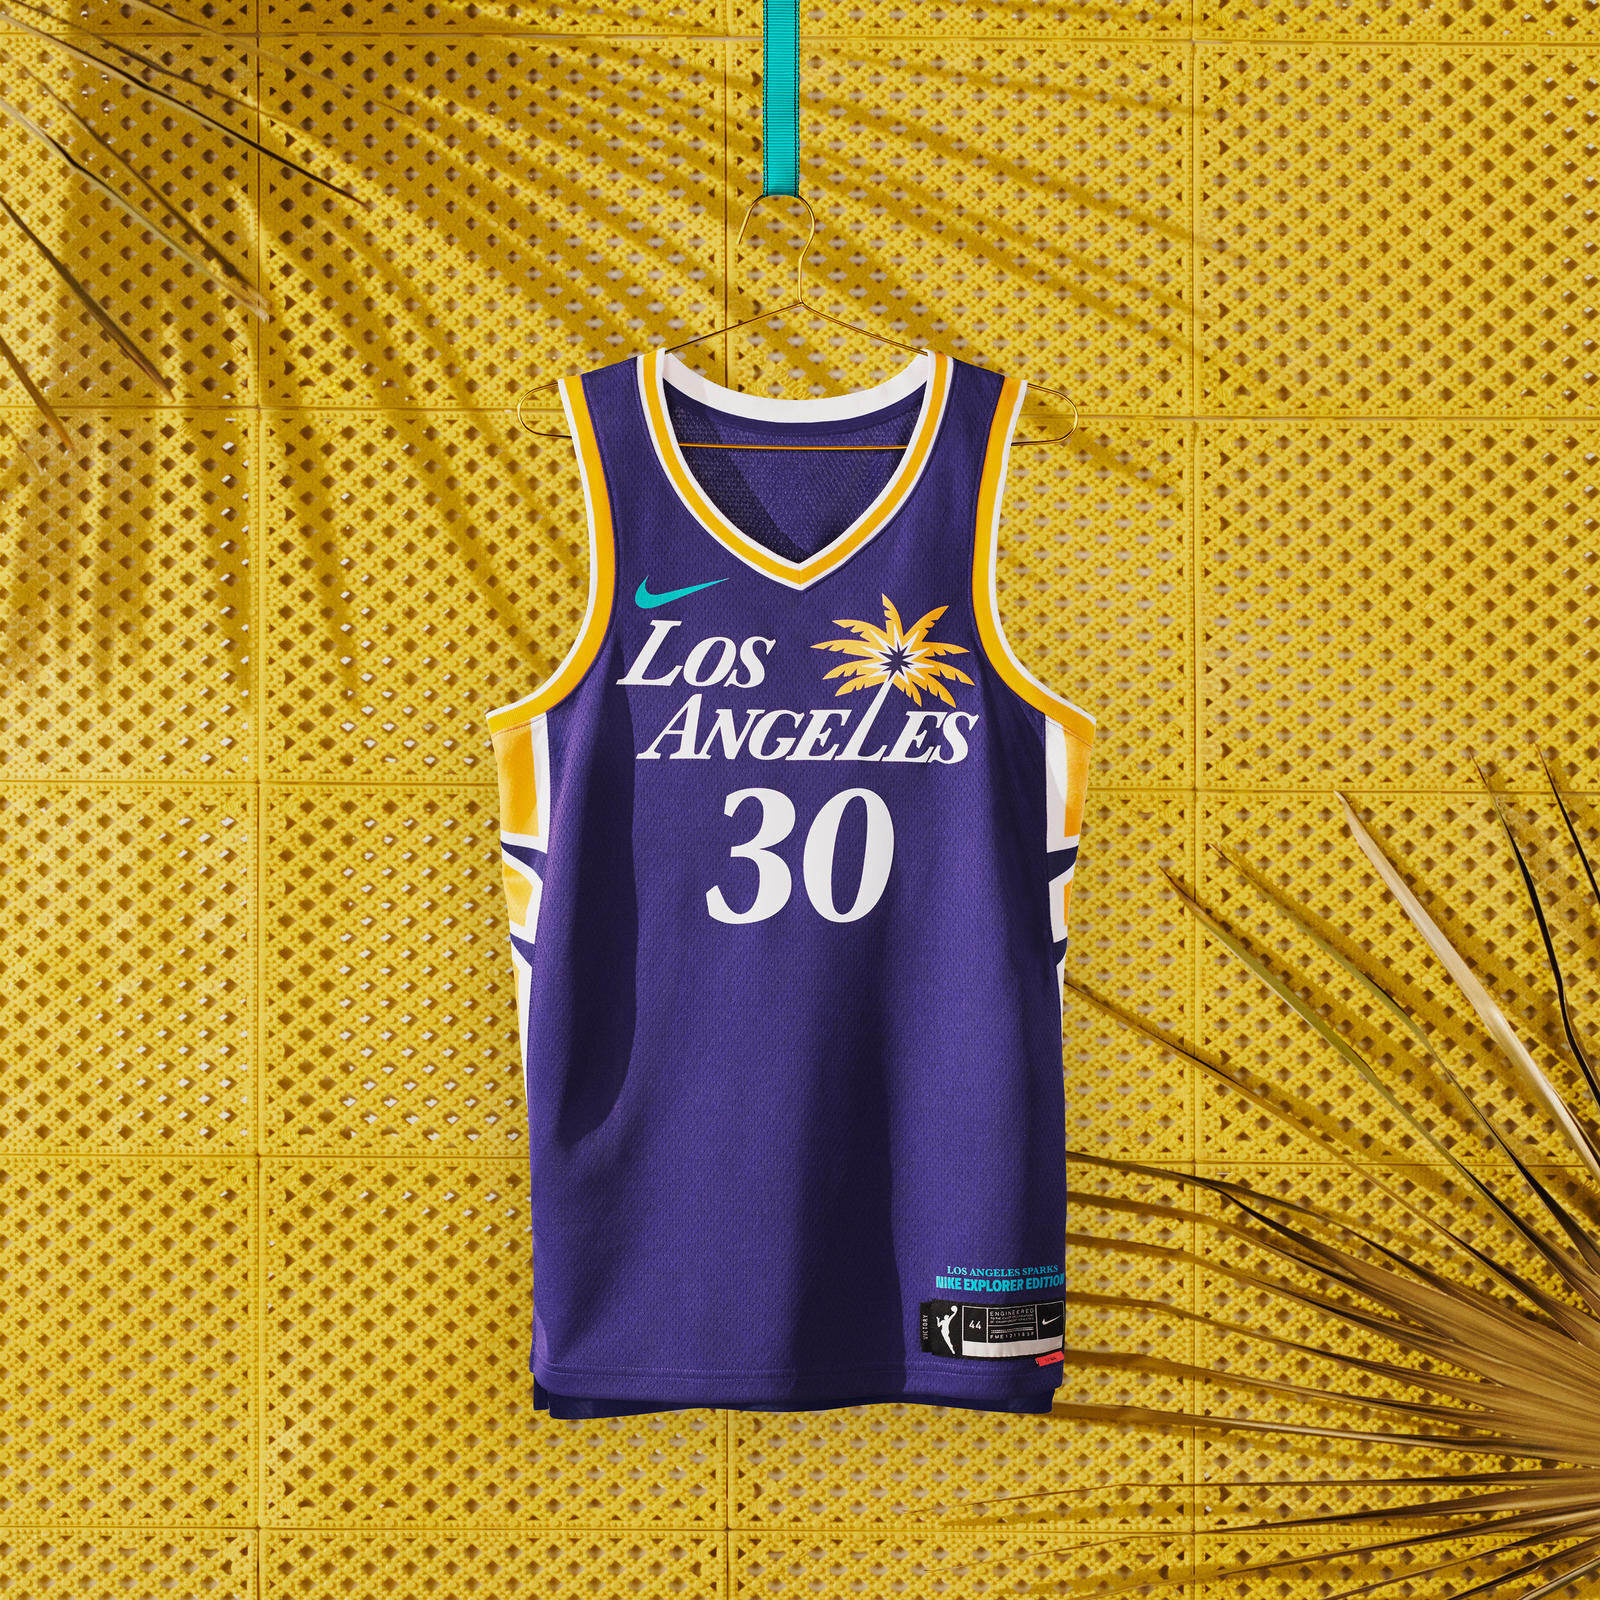 WNBA Jerseys Feature the Jumpman  Available Now — CNK Daily (ChicksNKicks)